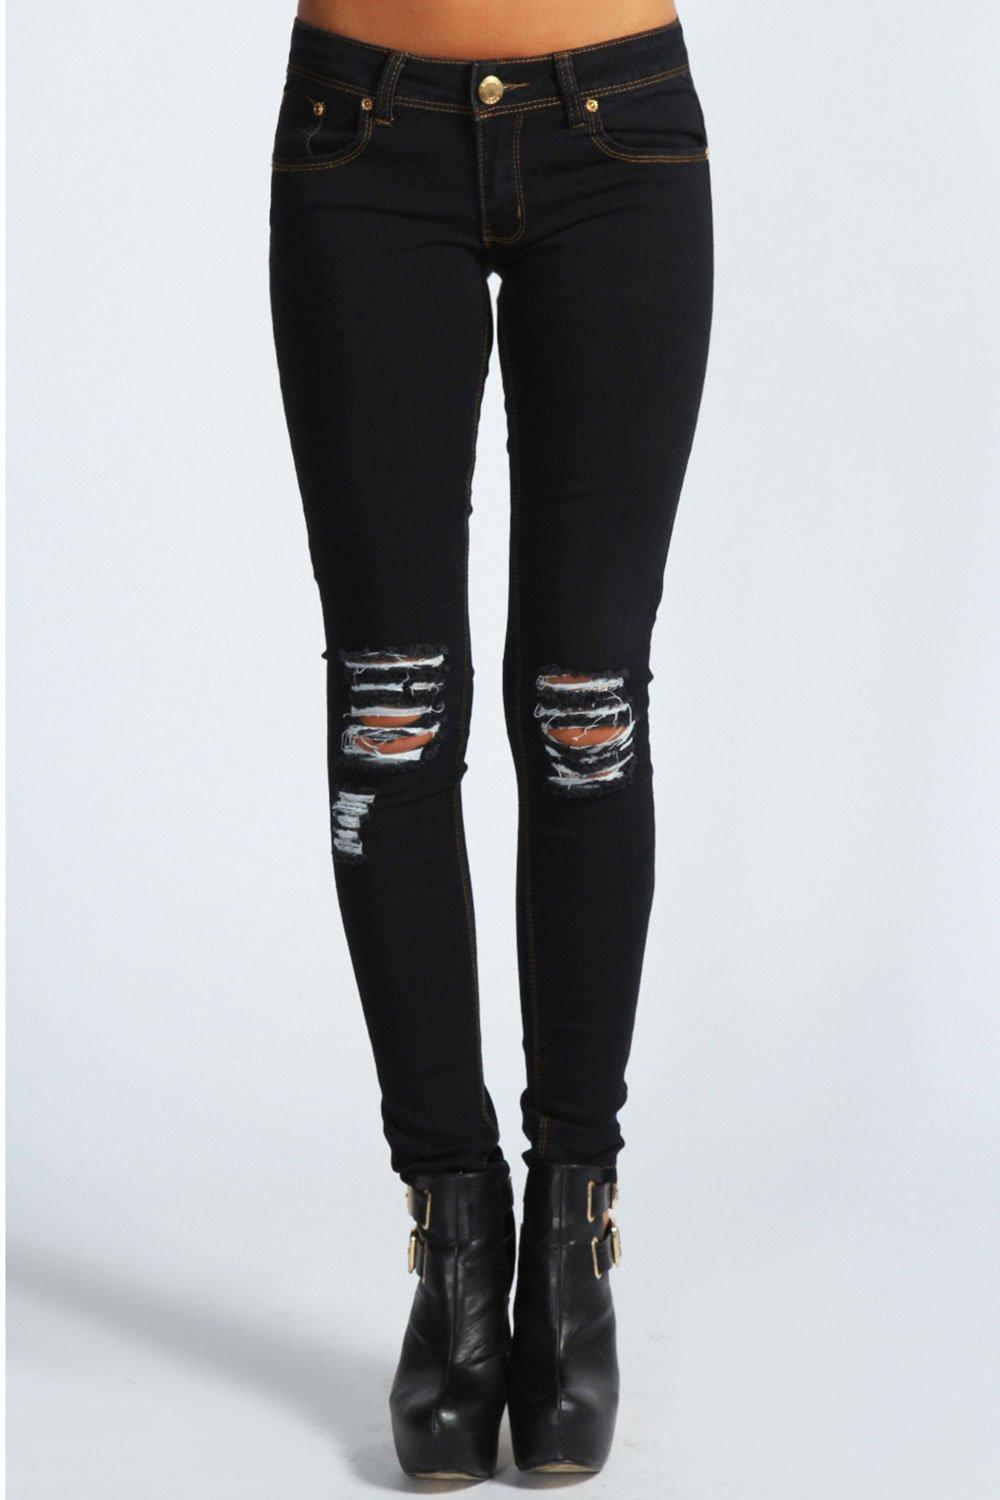 Laura Distressed Ripped Knee Skinny Jeans at boohoo.com